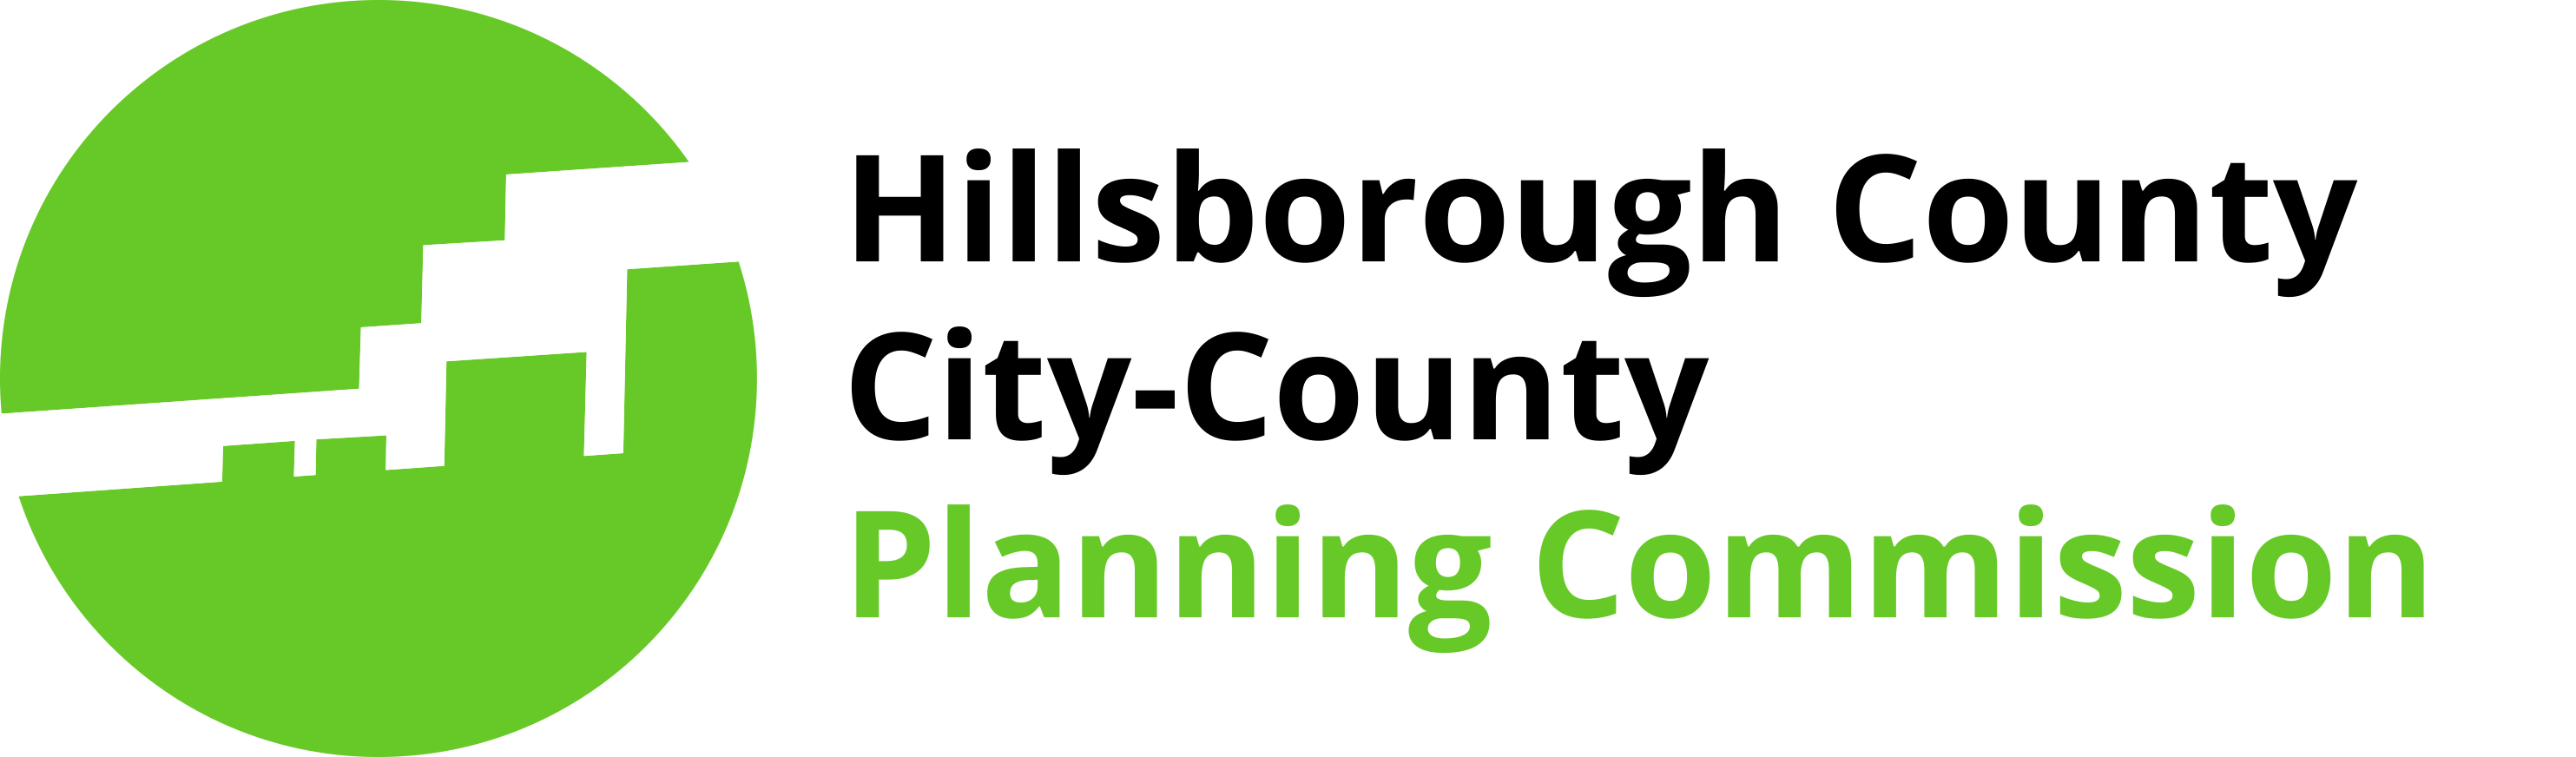 Hillsborough County City-County Planning Commission logo with text